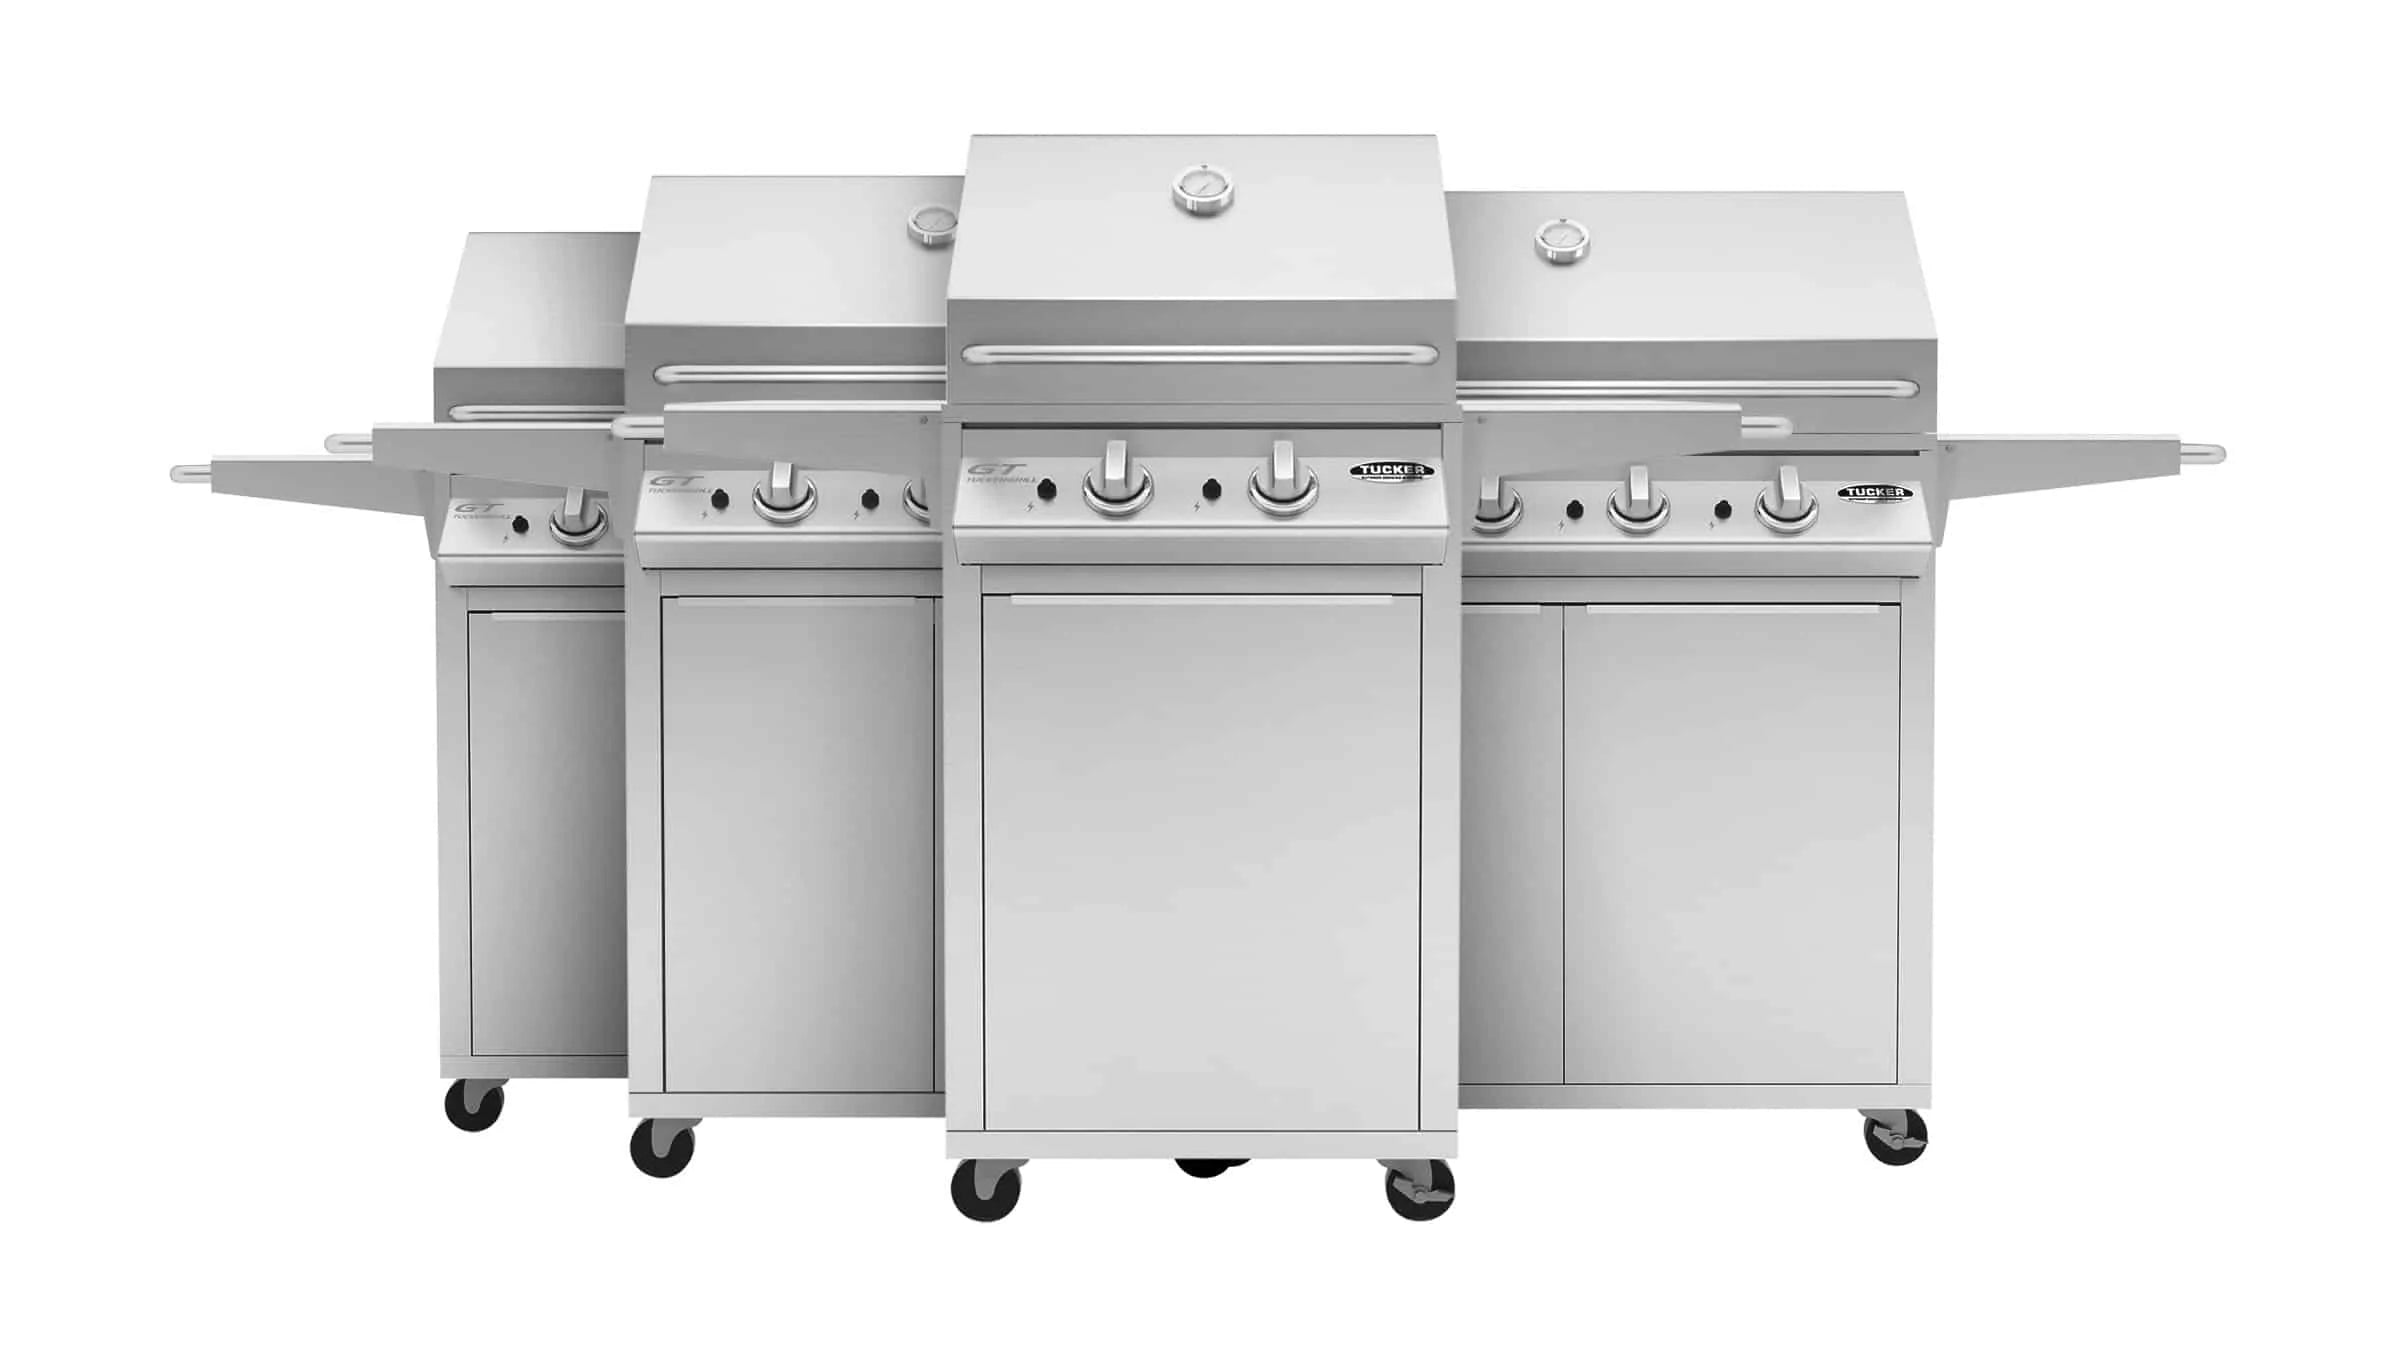 5 advantages of an infrared gas burner on your BBQ - Coolblue